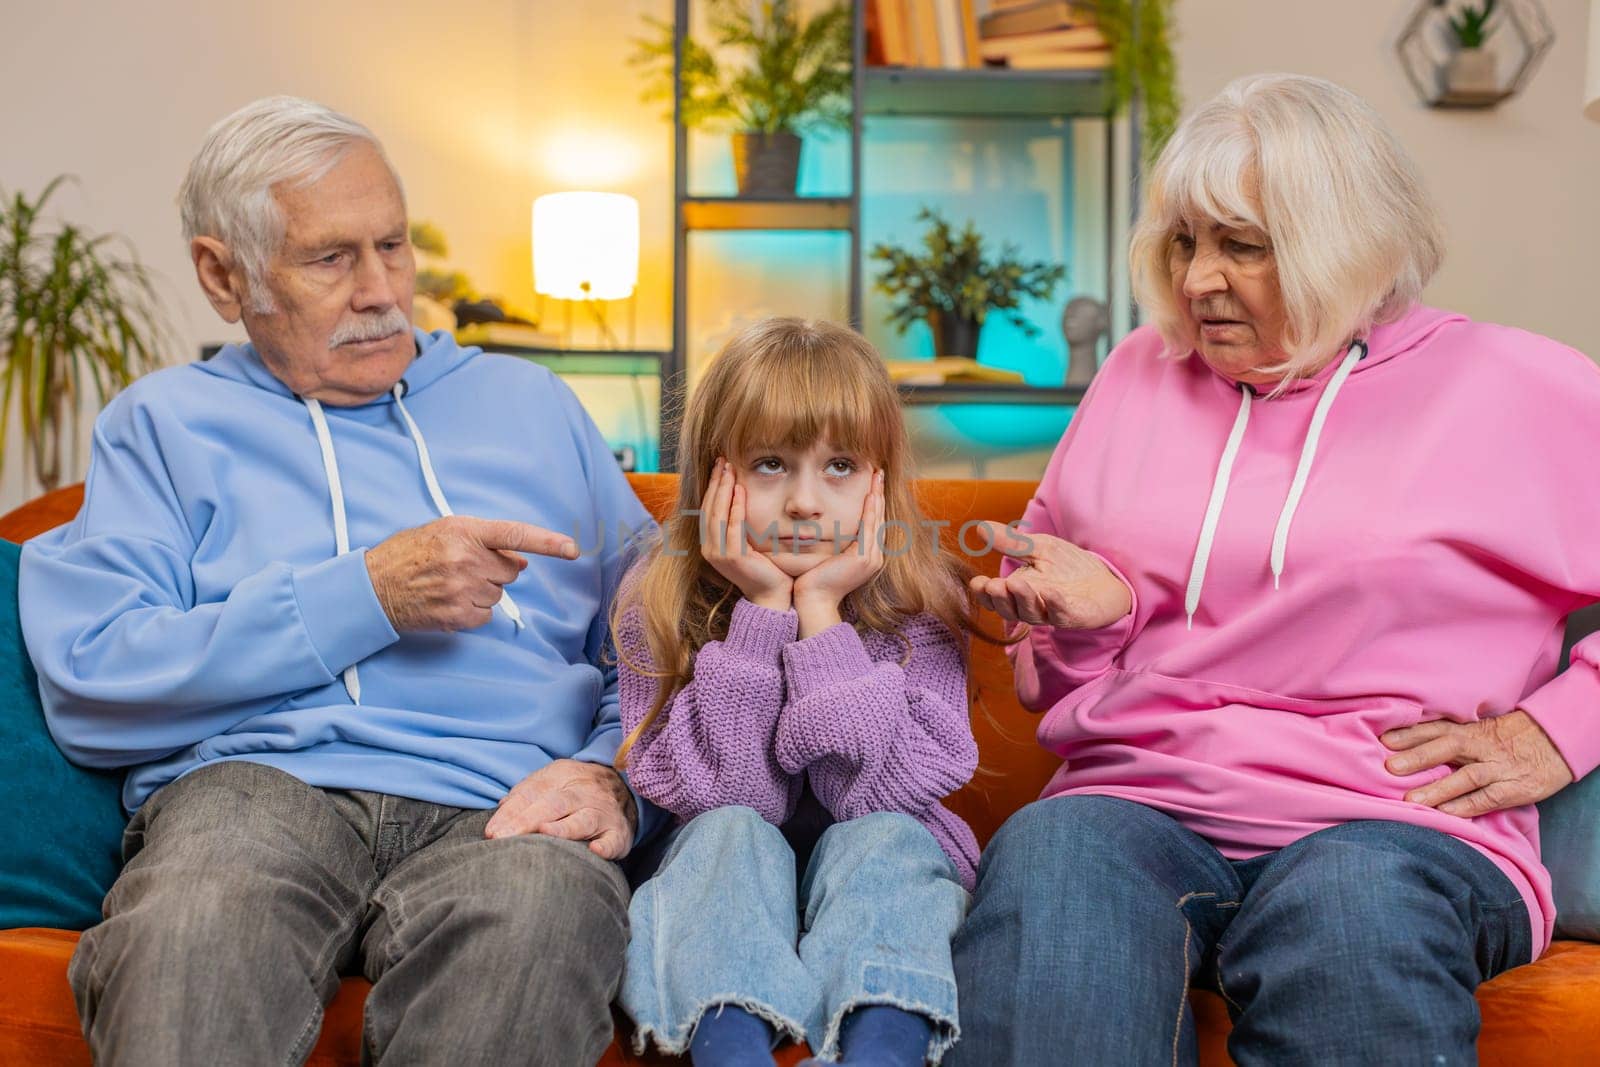 Irritated grandfather and grandmother scolding granddaughter for bad behavior and disobedience on sofa, raising voice scream at little grandchild. Difficulties of upbringing, misbehaved child concept